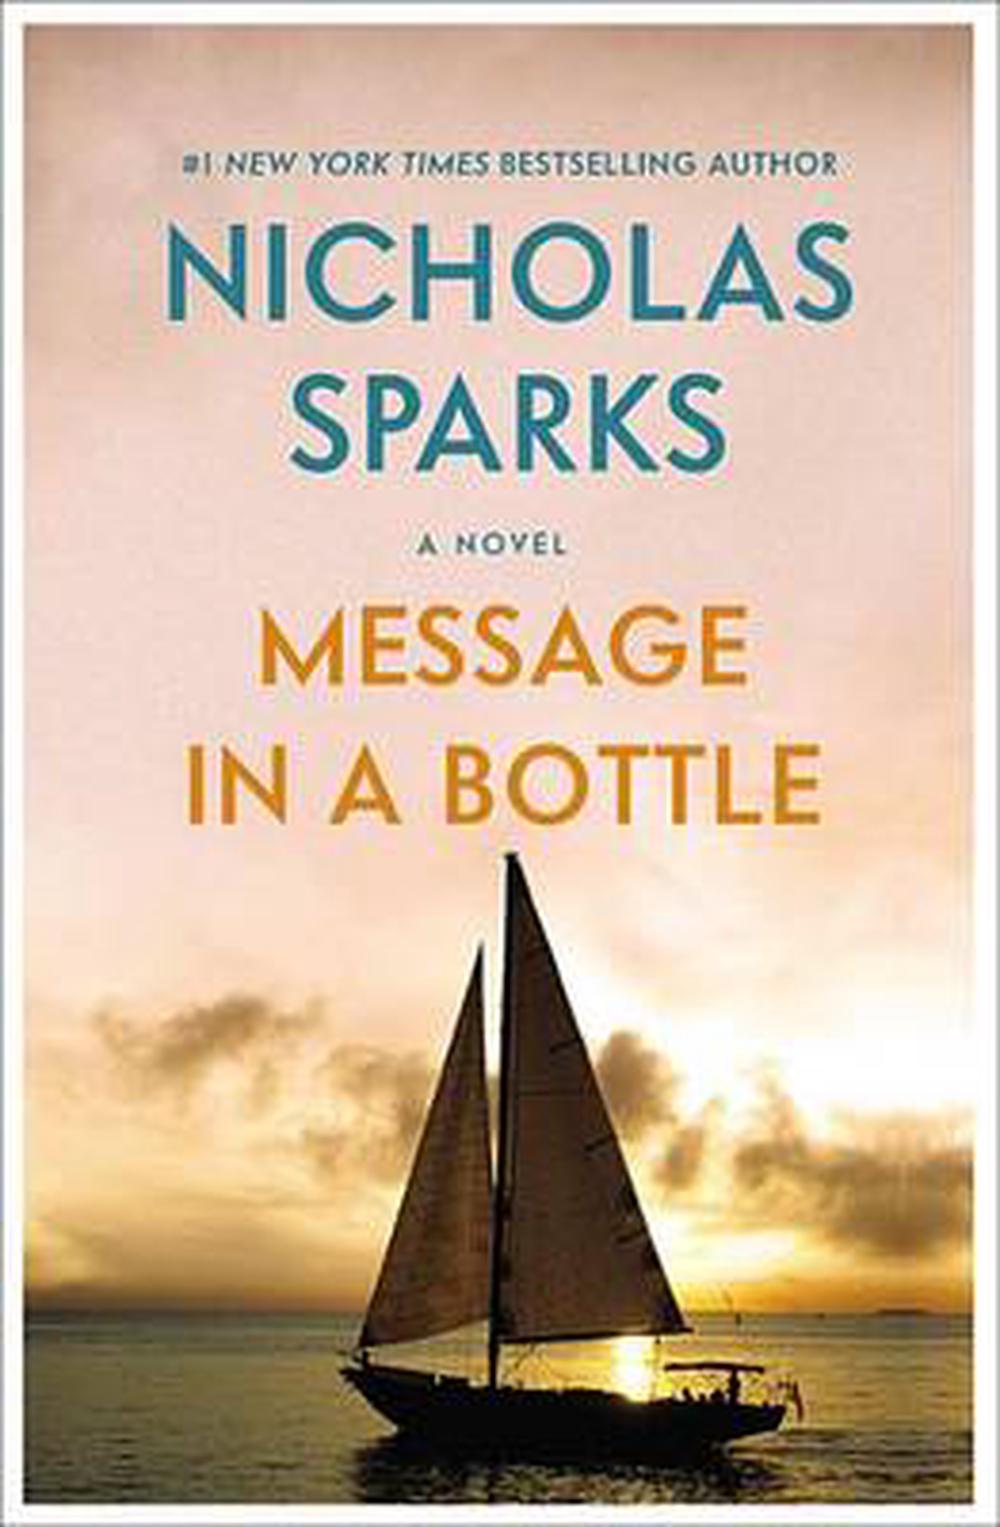 Message in a Bottle by Nicholas Sparks (English) Paperback Book Free Shipping! 9781455569076 | eBay